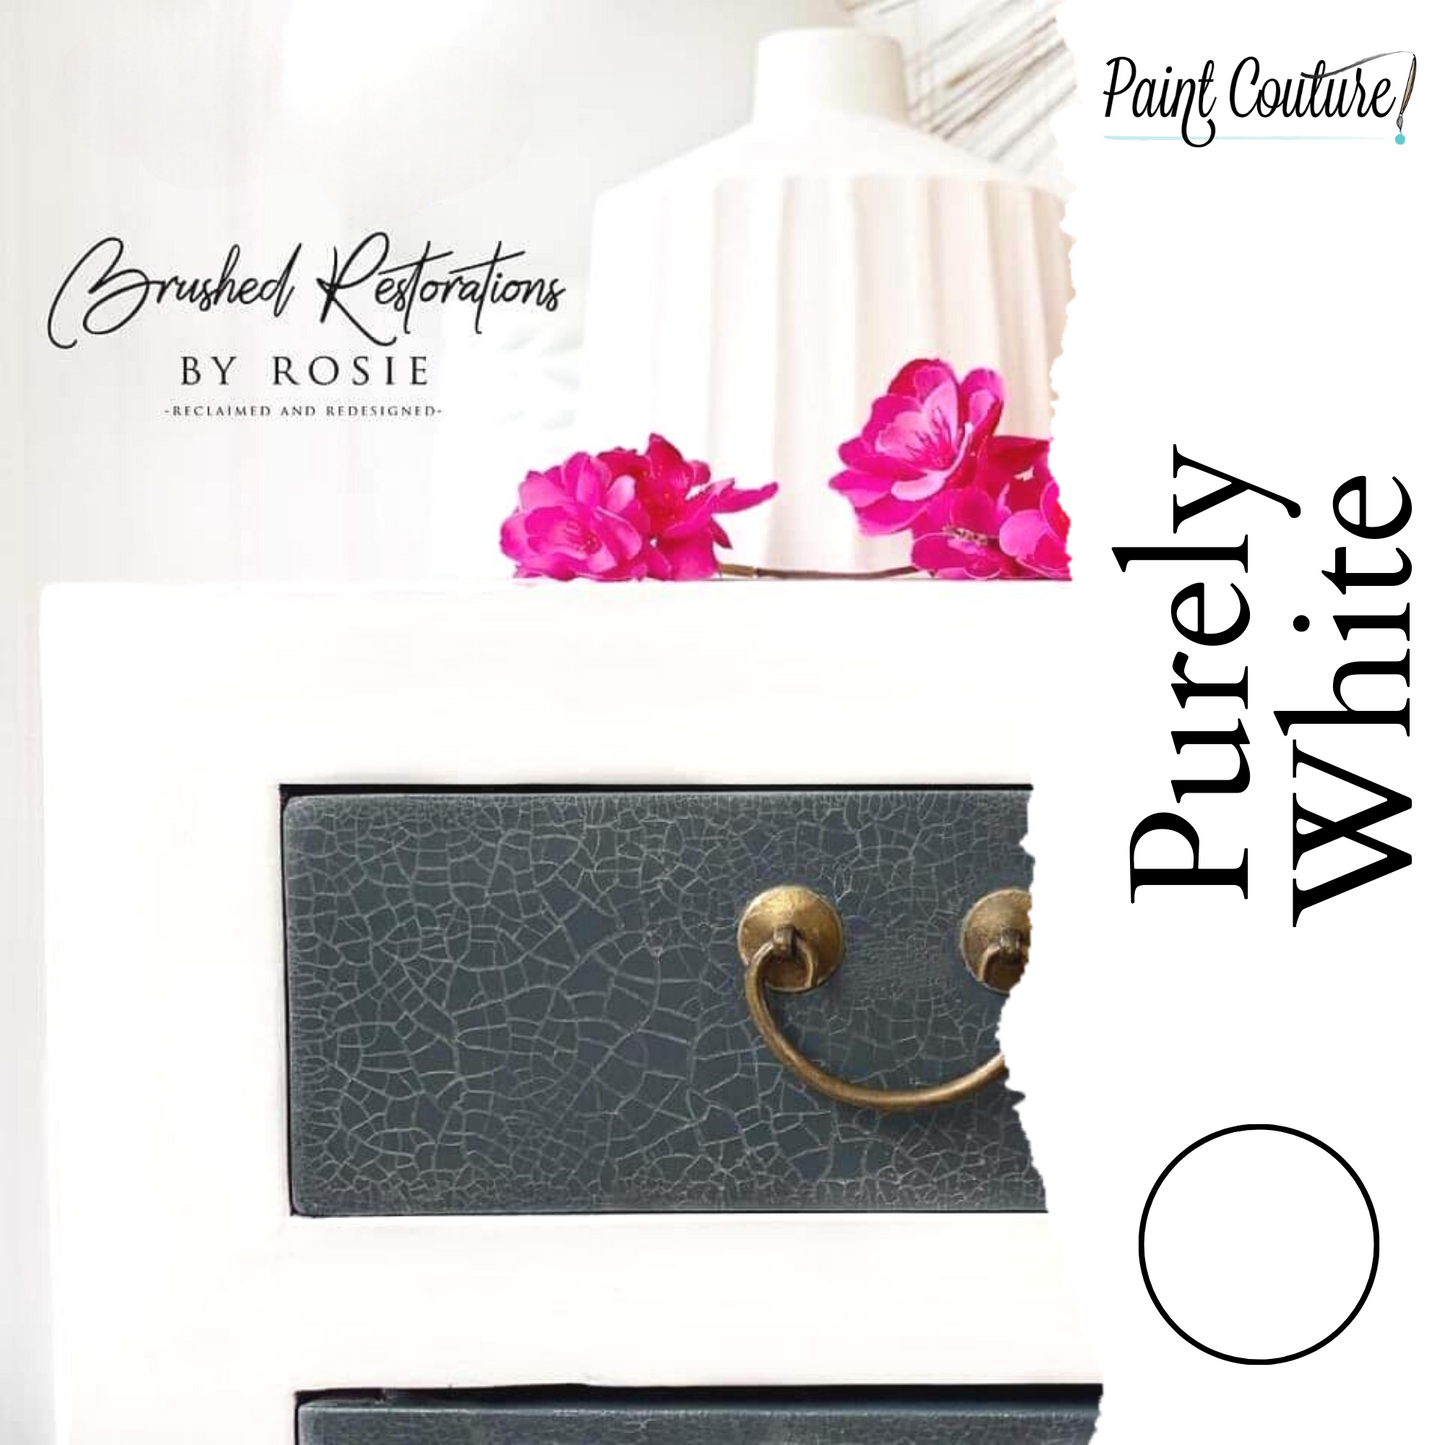 Paint Couture Purely White - Acrylic Mineral Paint with a Flat Finish!